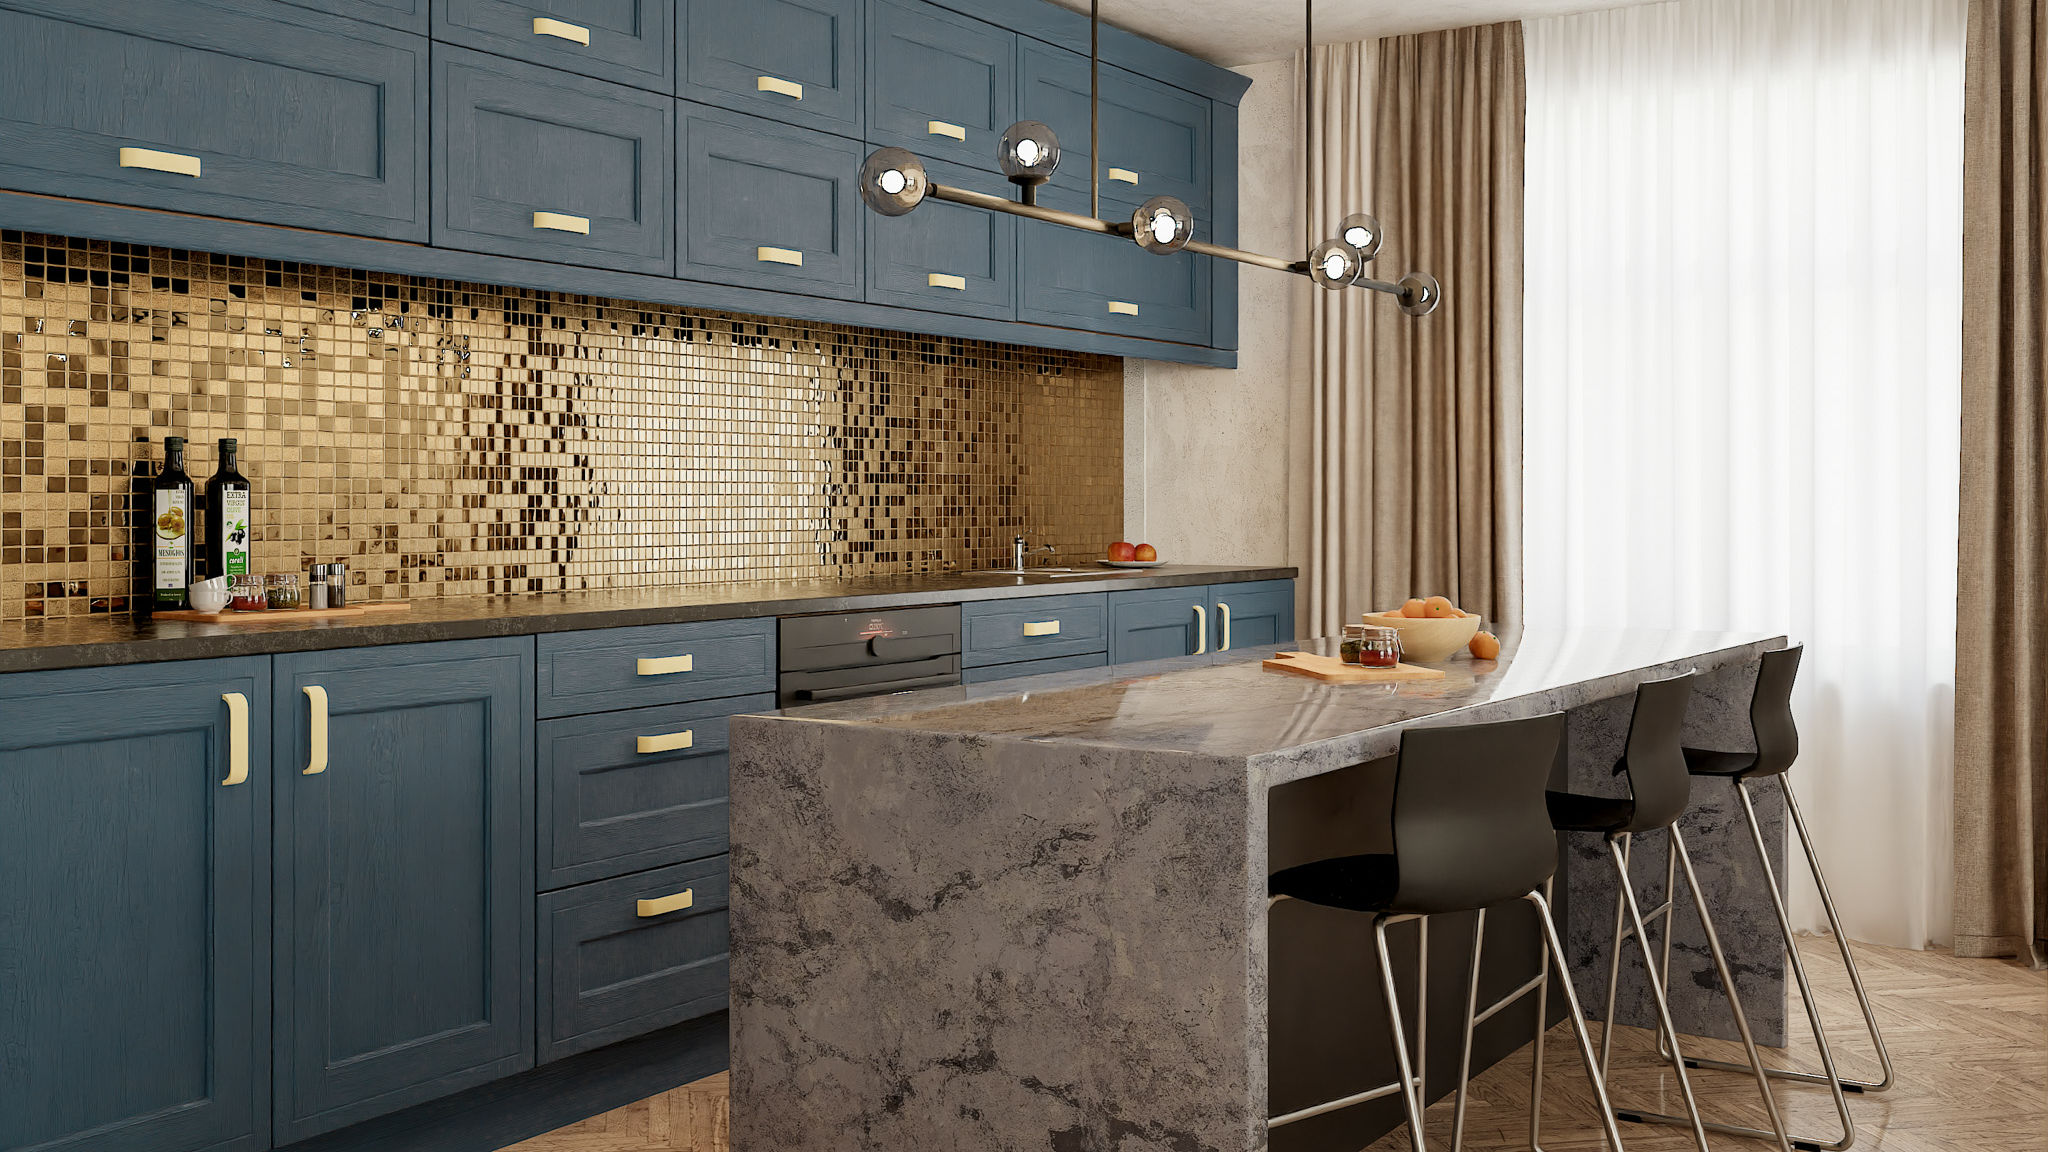 Mock Inframe Winslow Marine kitchens combining the classic inframe style with a contemporary marine blue finish